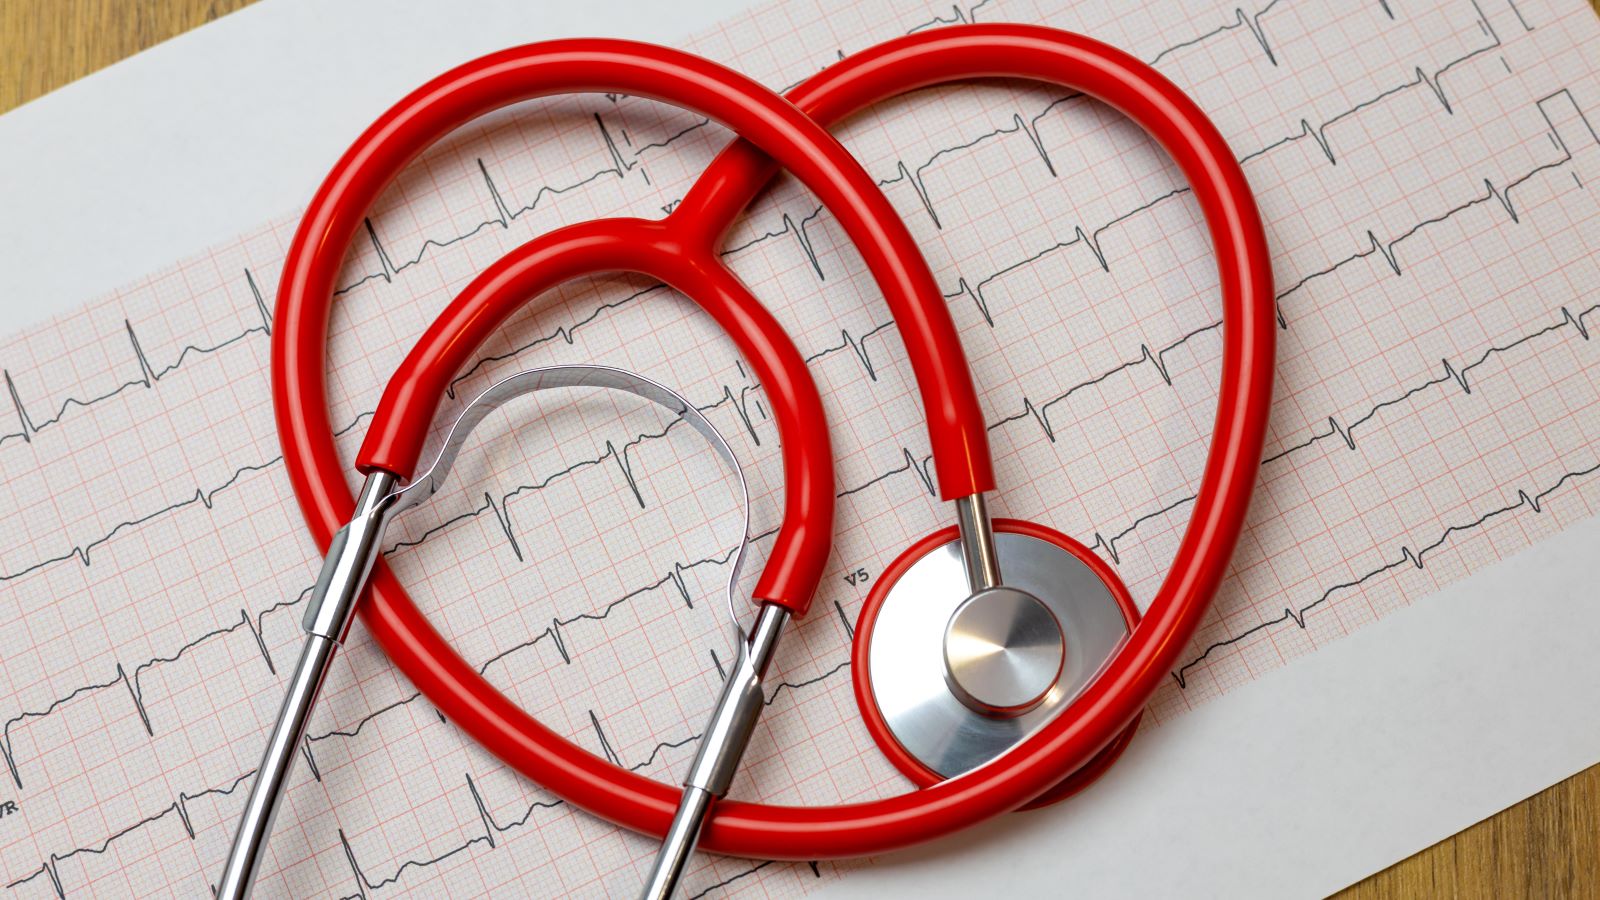 5 Signs You Might Need a Cardiologist